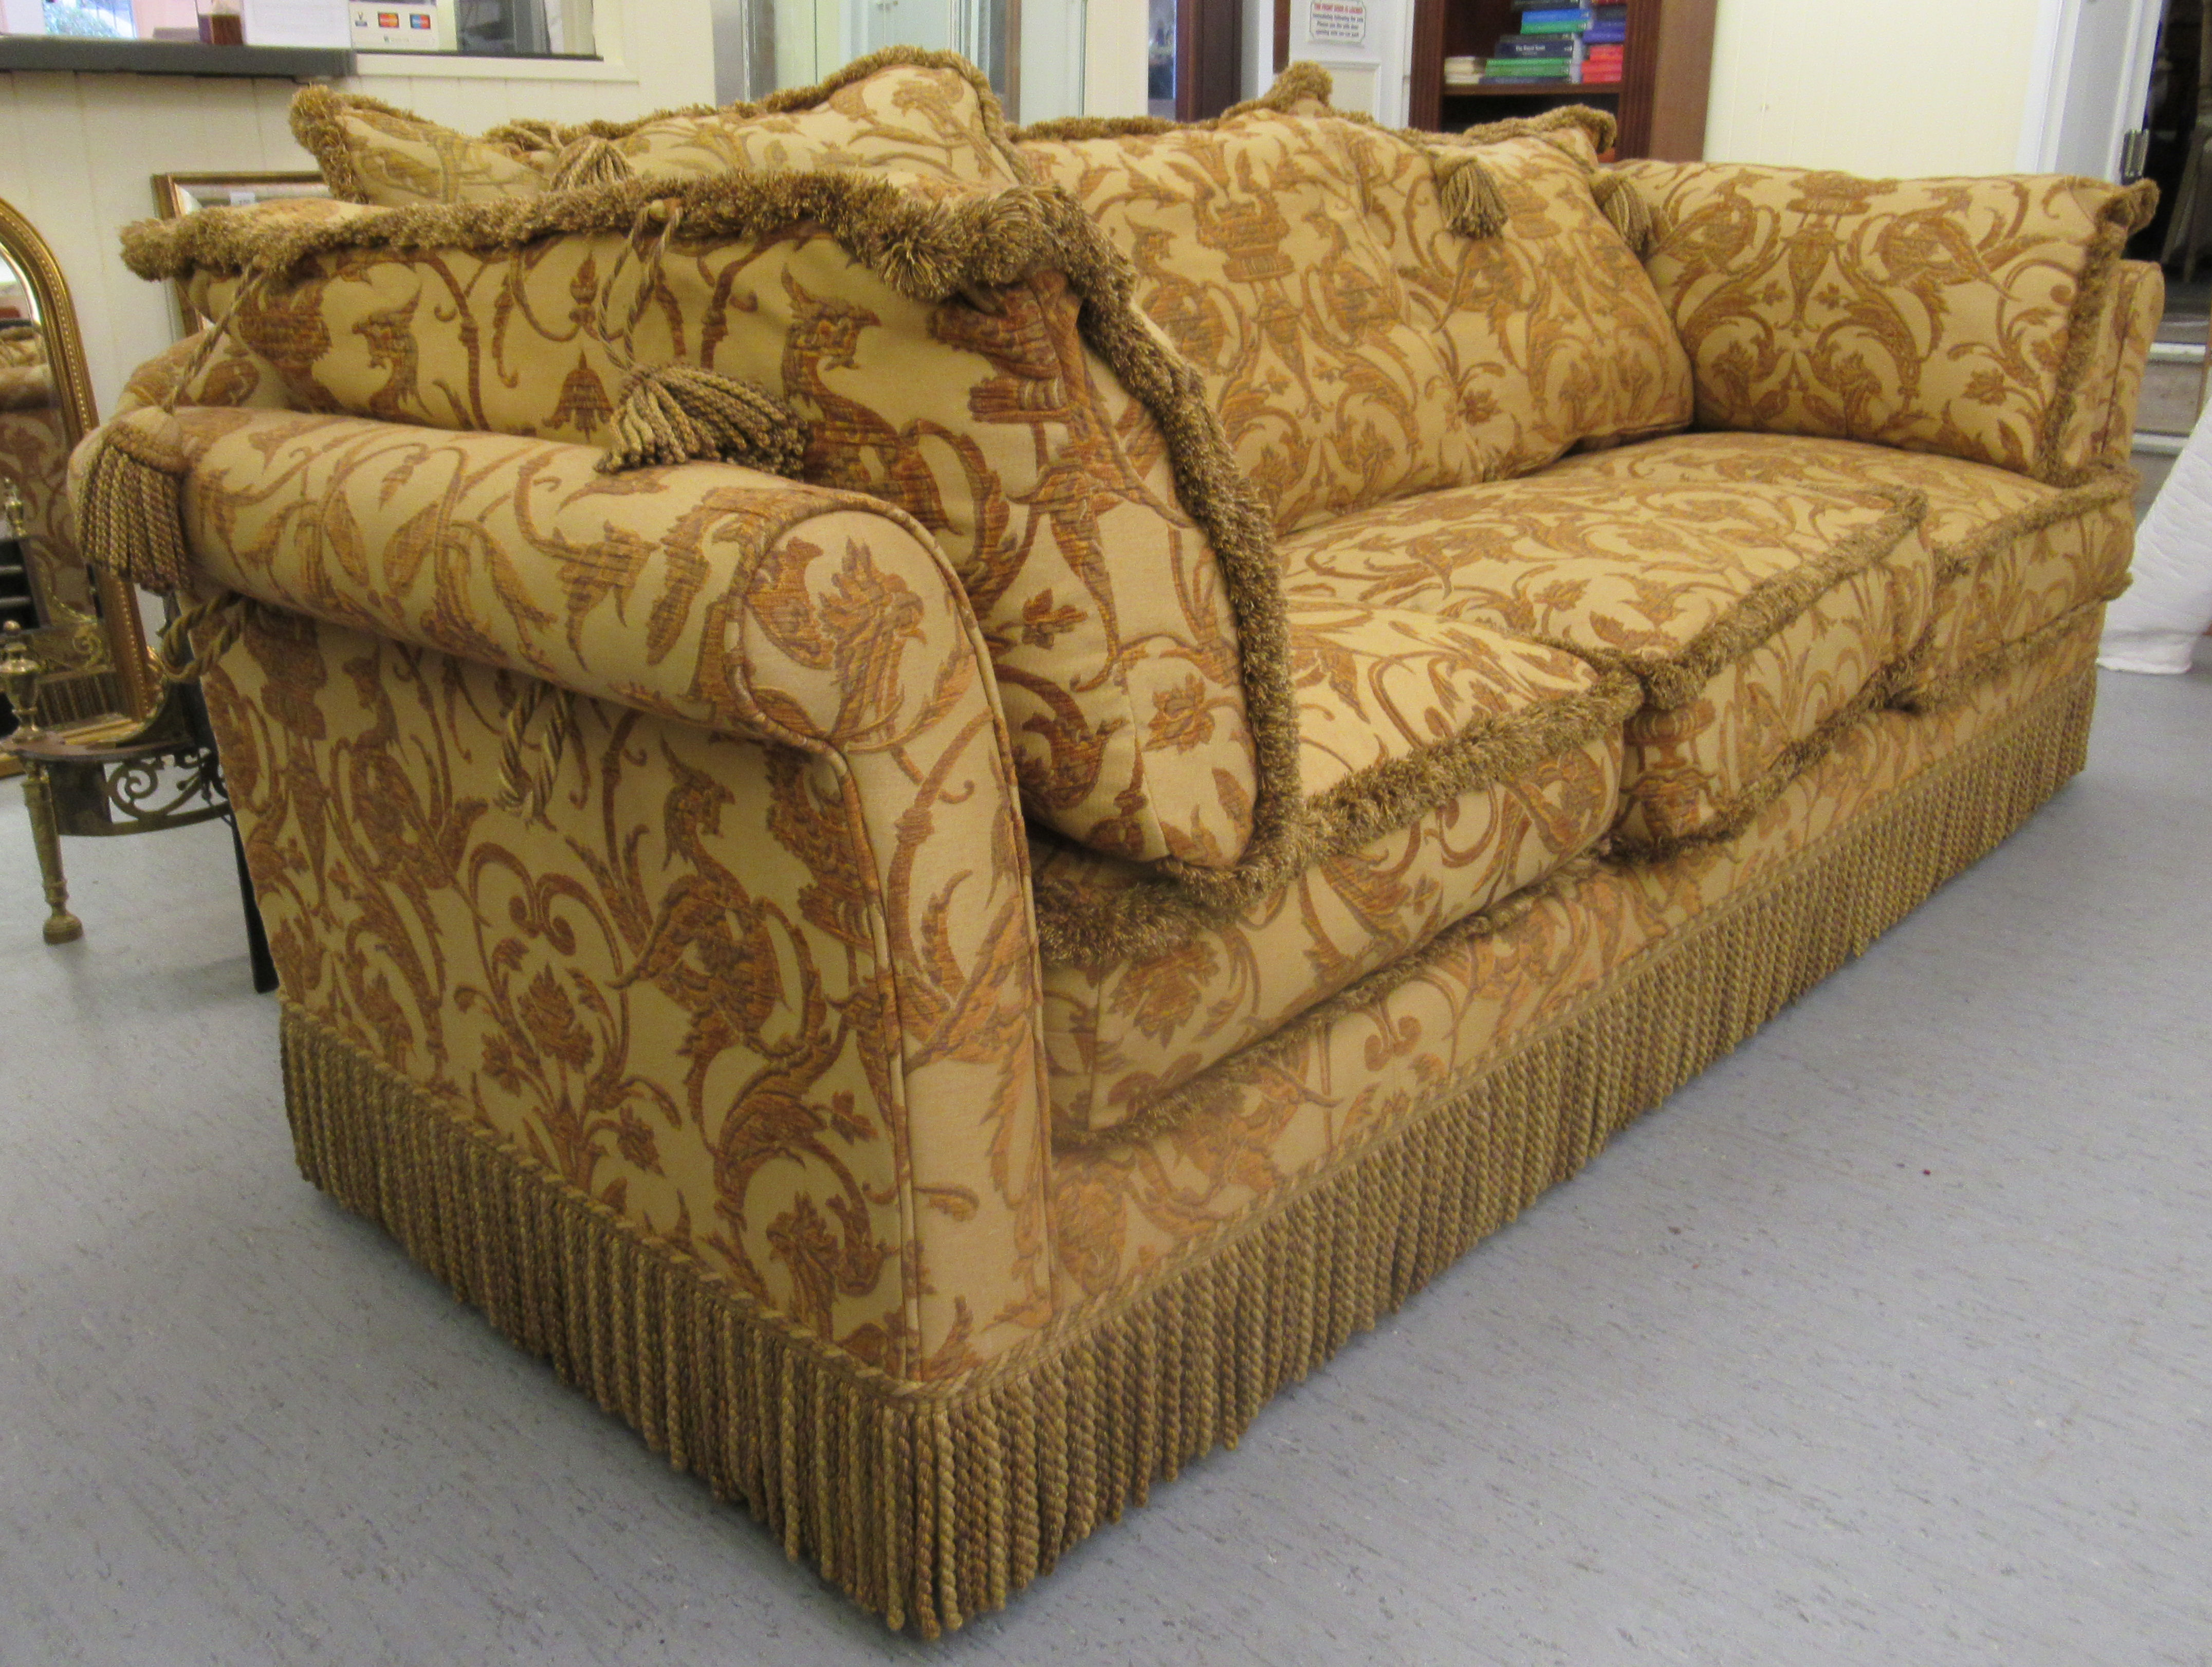 A modern three person settee with a low back and level, scrolled arms, - Image 4 of 4